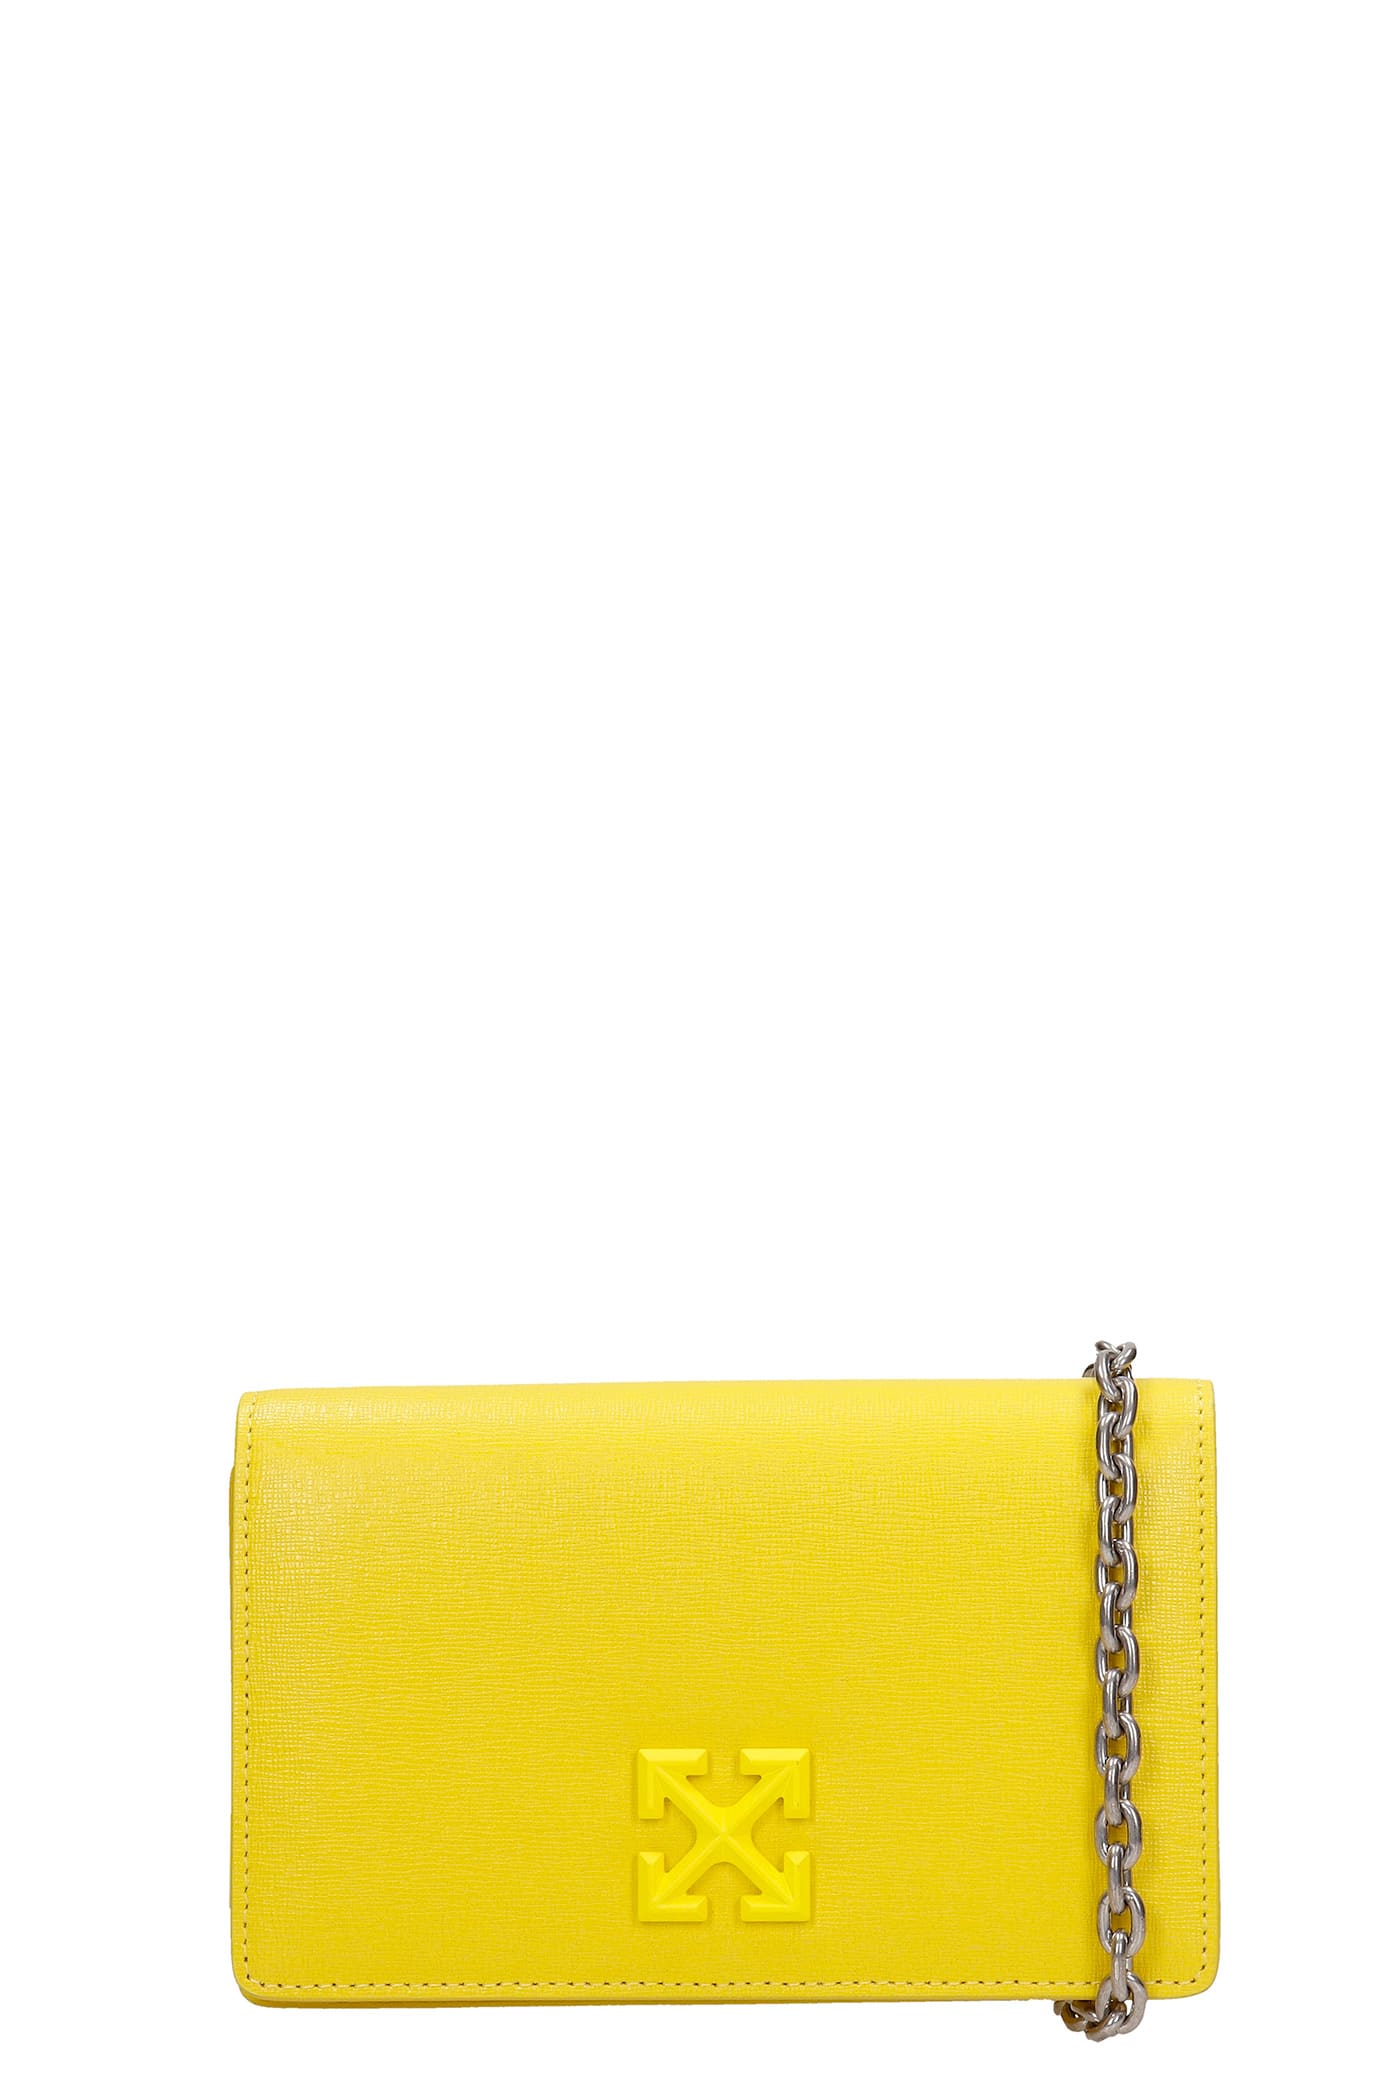 OFF-WHITE SHOULDER BAG IN YELLOW LEATHER,OWNN022S21LEA0021800